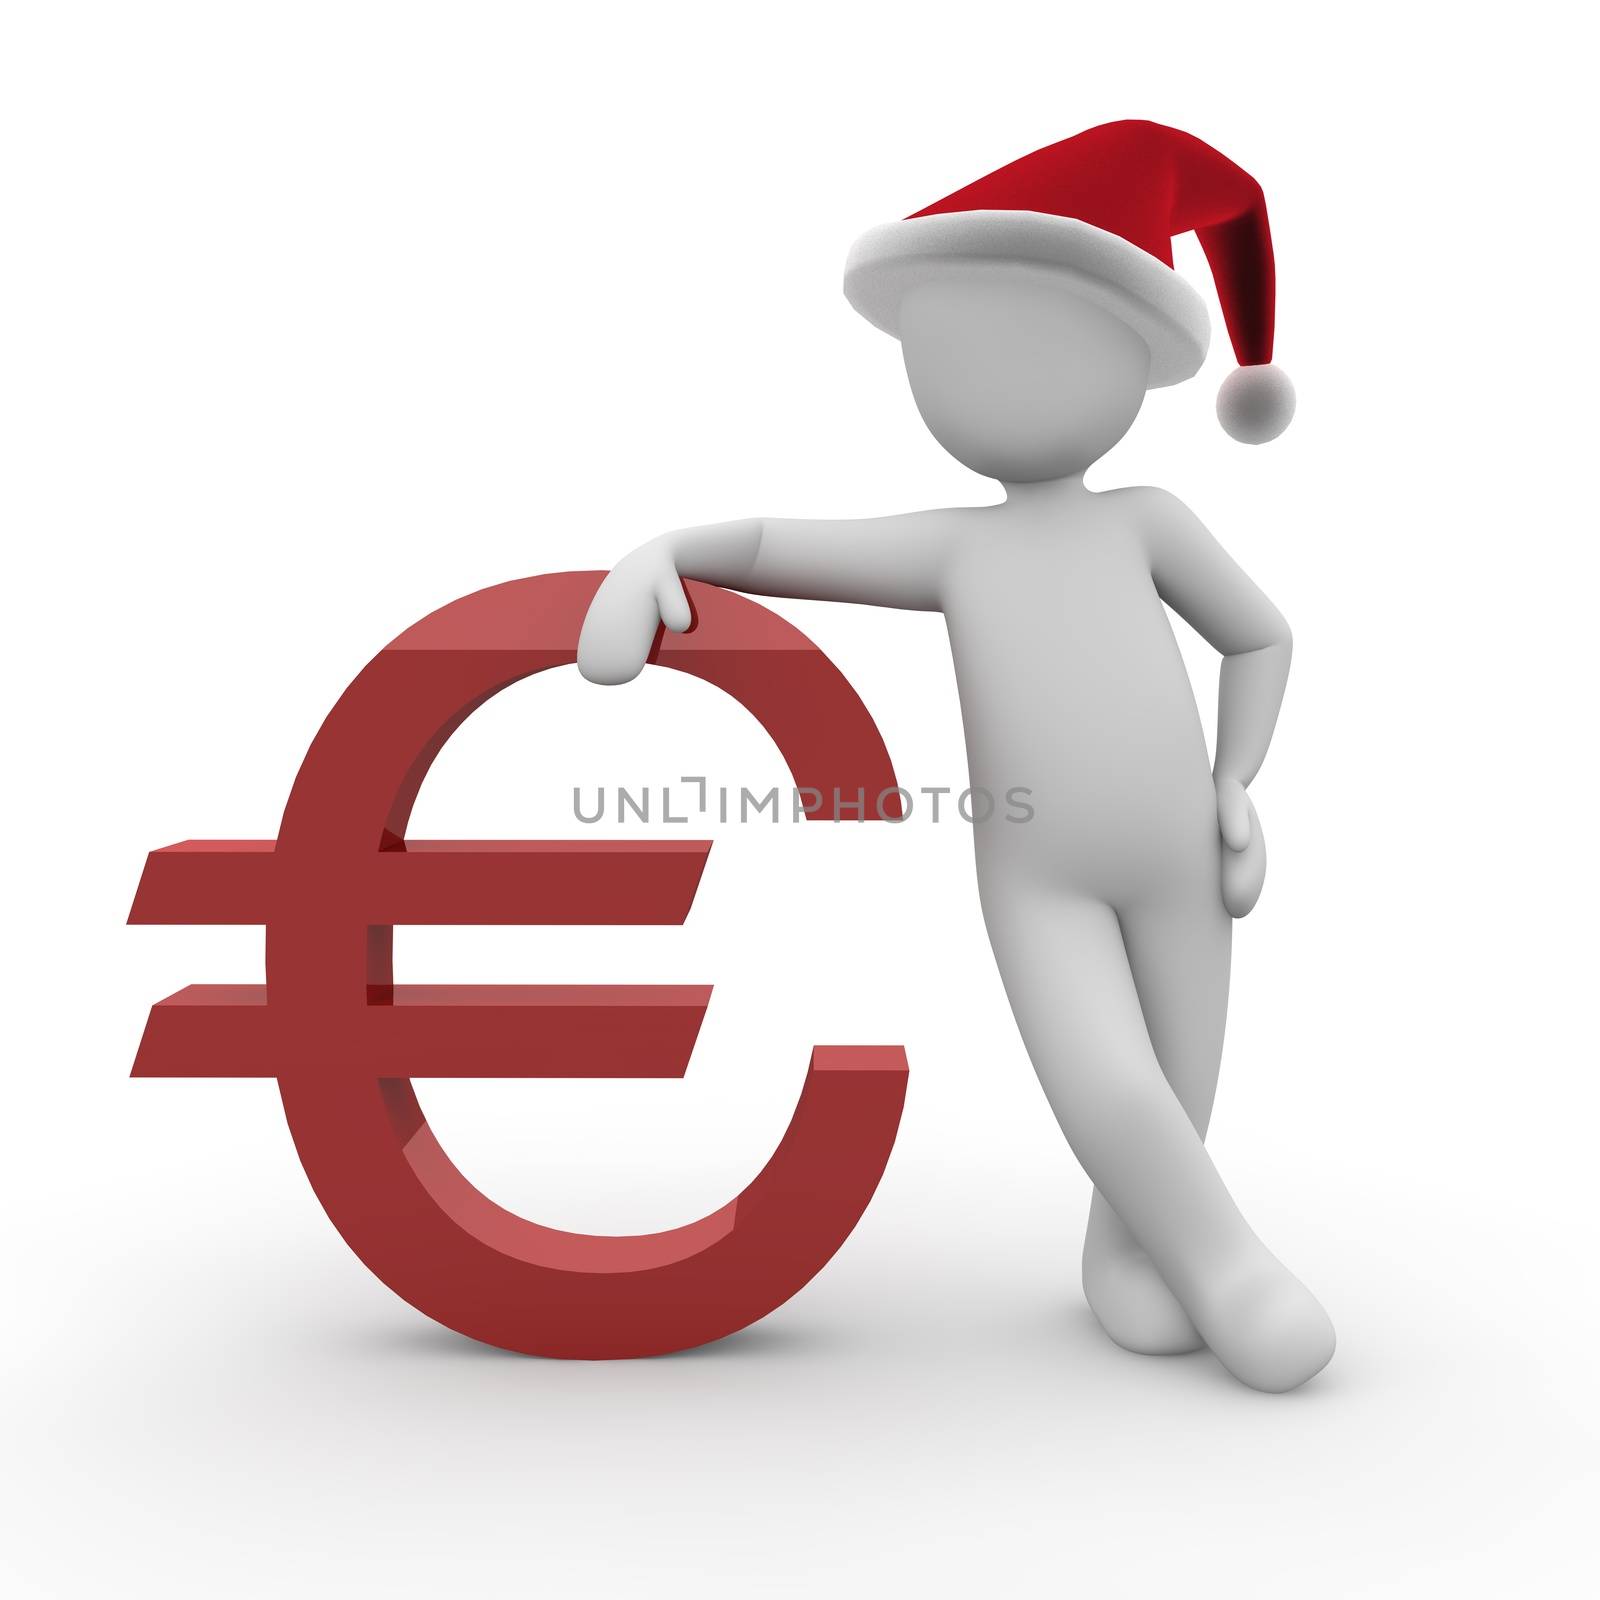 The character with the stocking cap posing on a red euro sign.